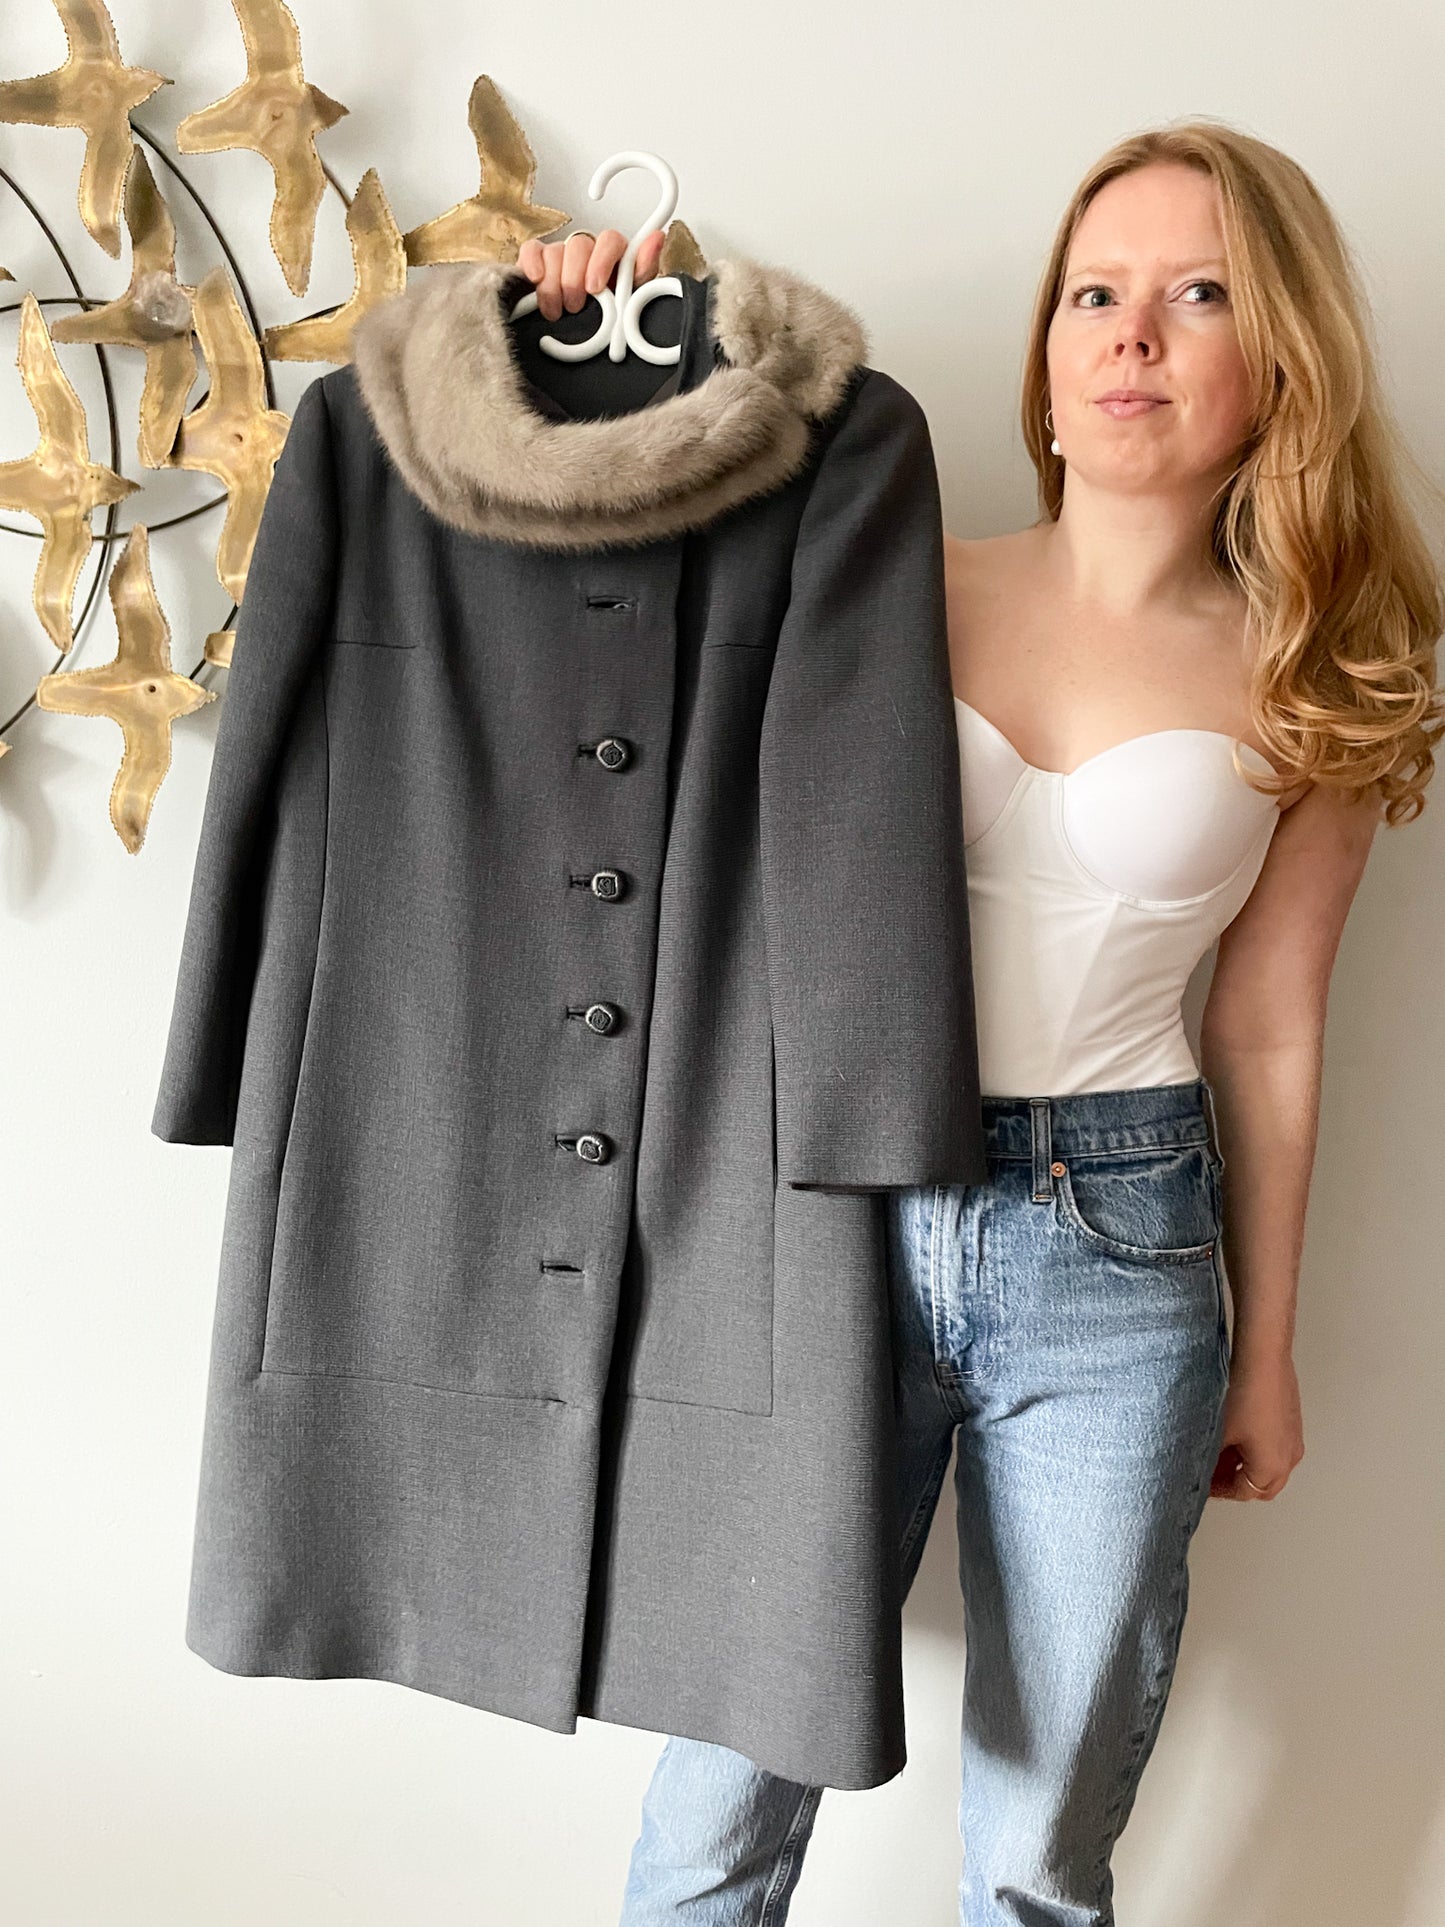 Vintage Grey Wool Long Coat with Fur Trim - Small